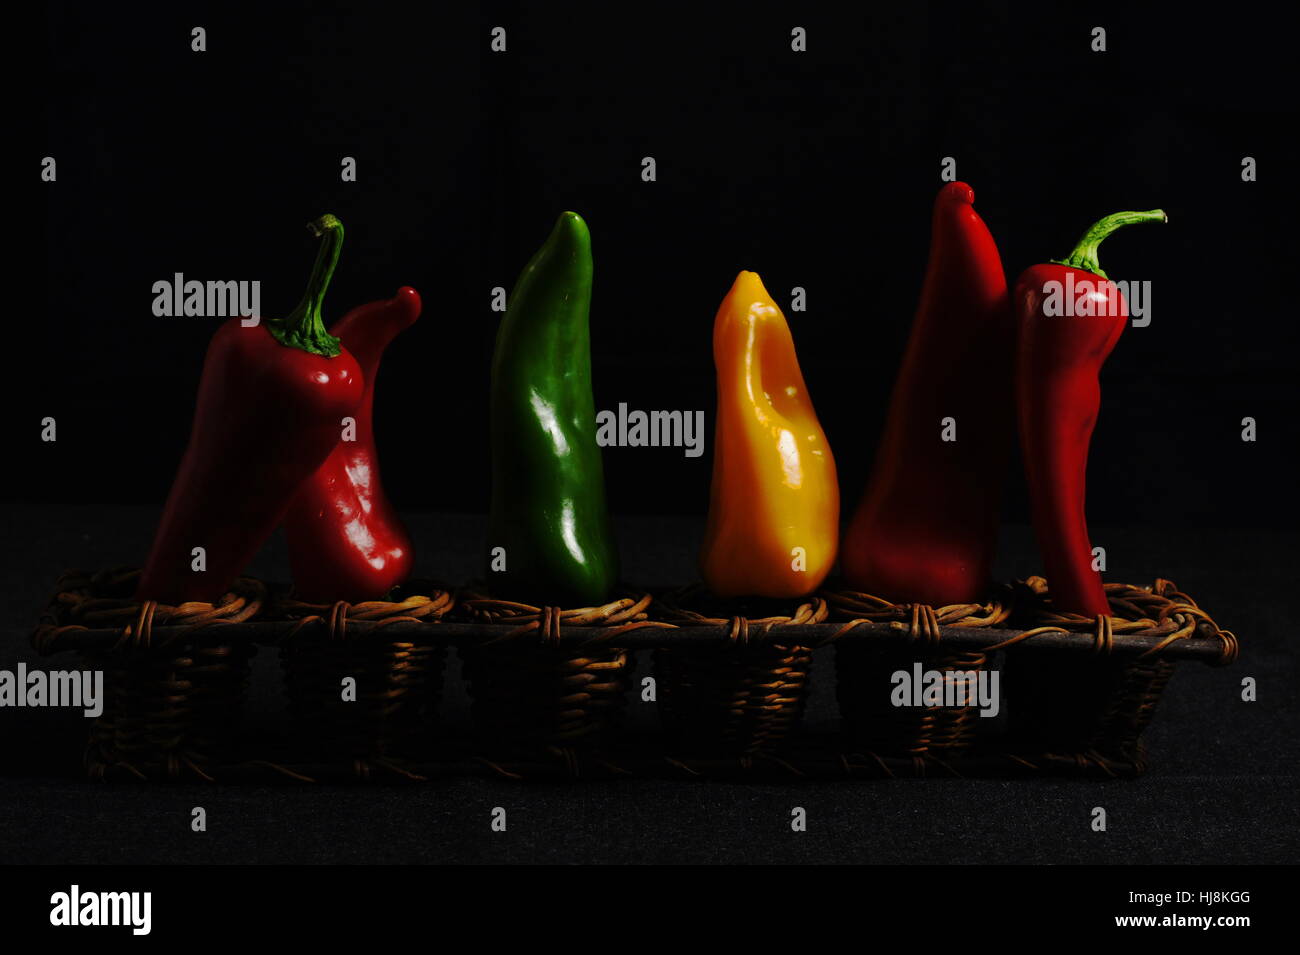 coloured, red peppers, volumes, difference, gang, group, familiy, family, Stock Photo